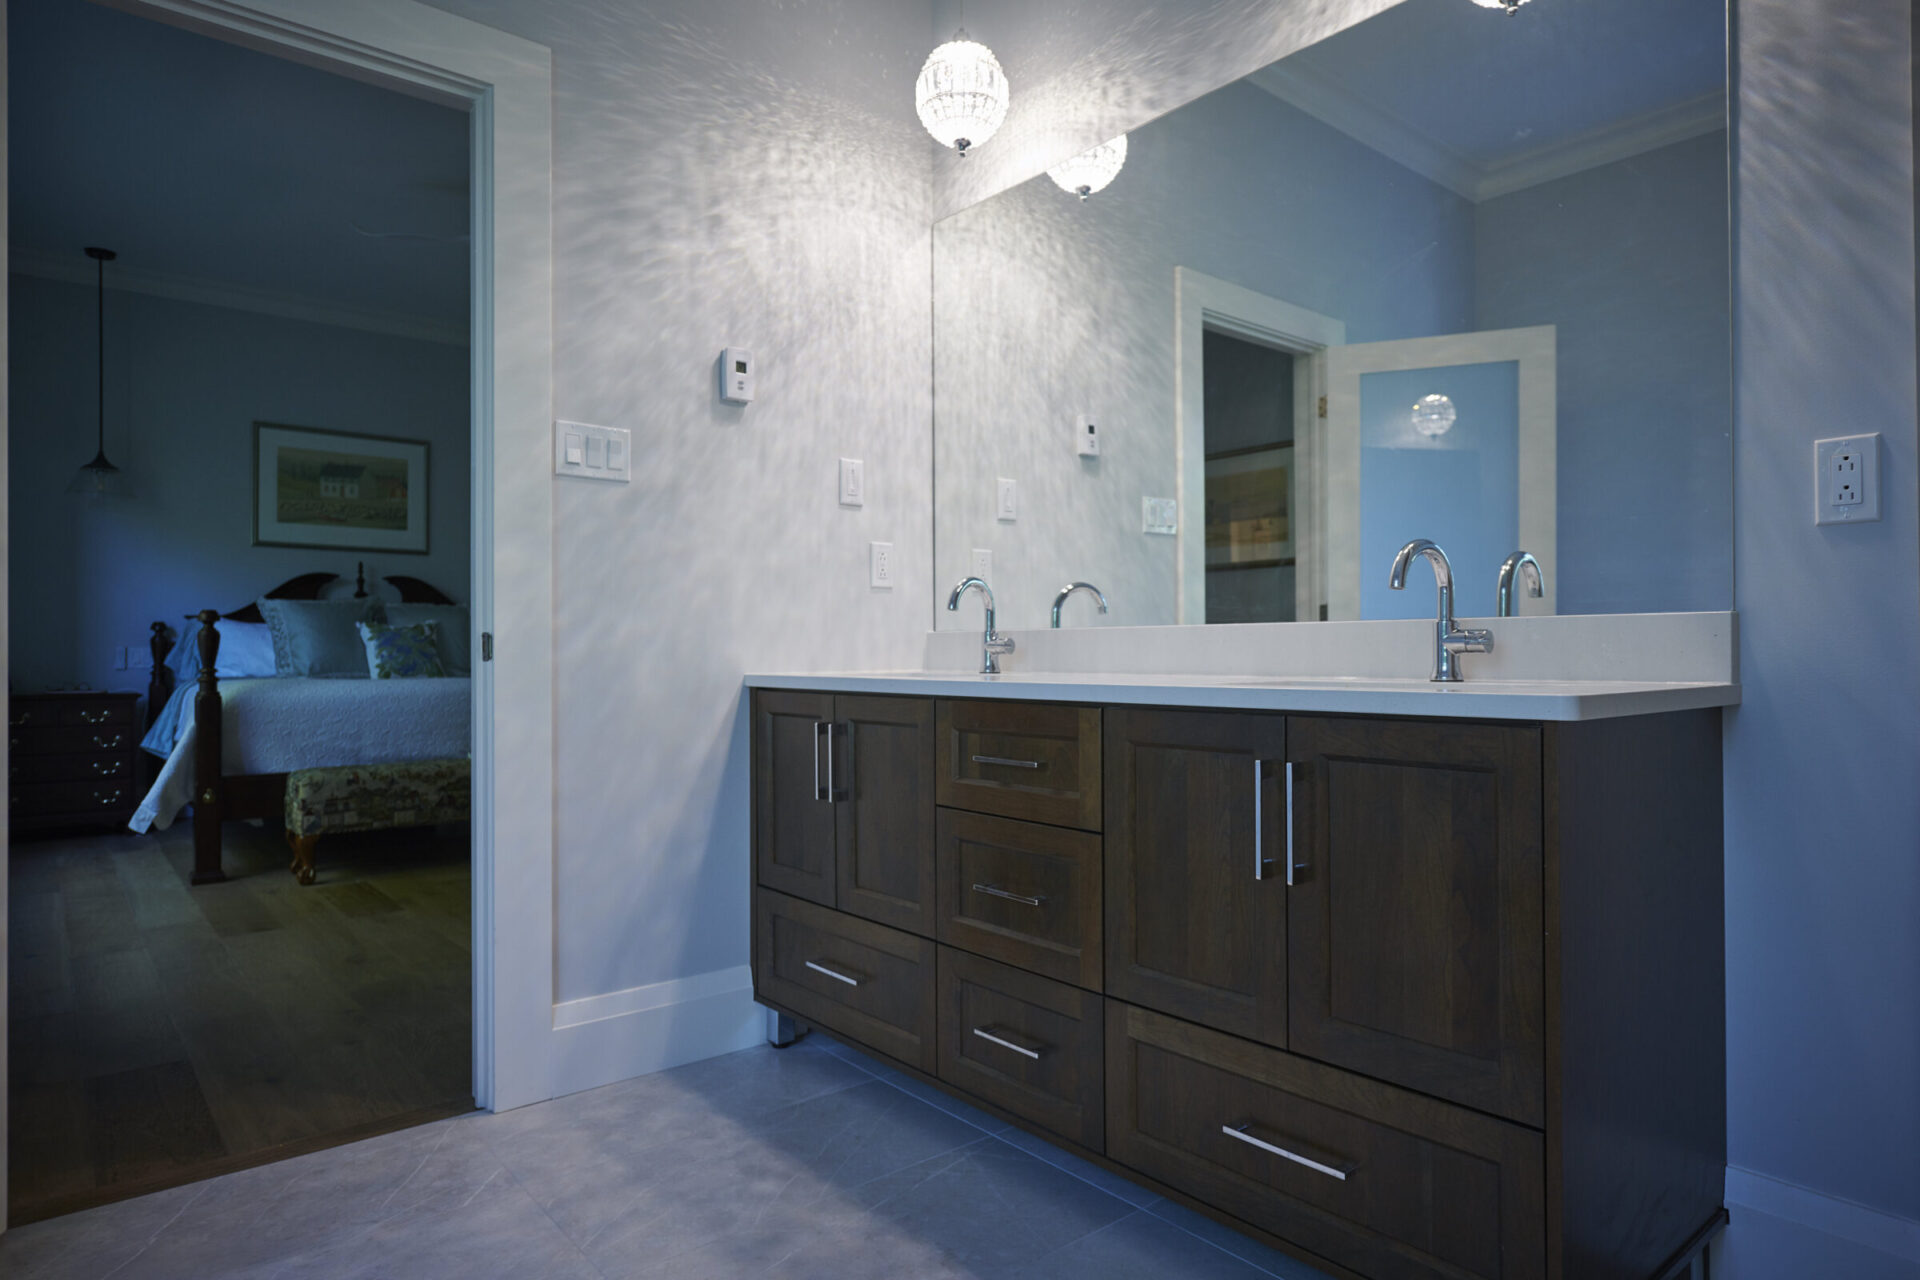 The image shows a modern bathroom with dark wood cabinets, a white countertop with two sinks, and a reflection of a bedroom through a mirror.